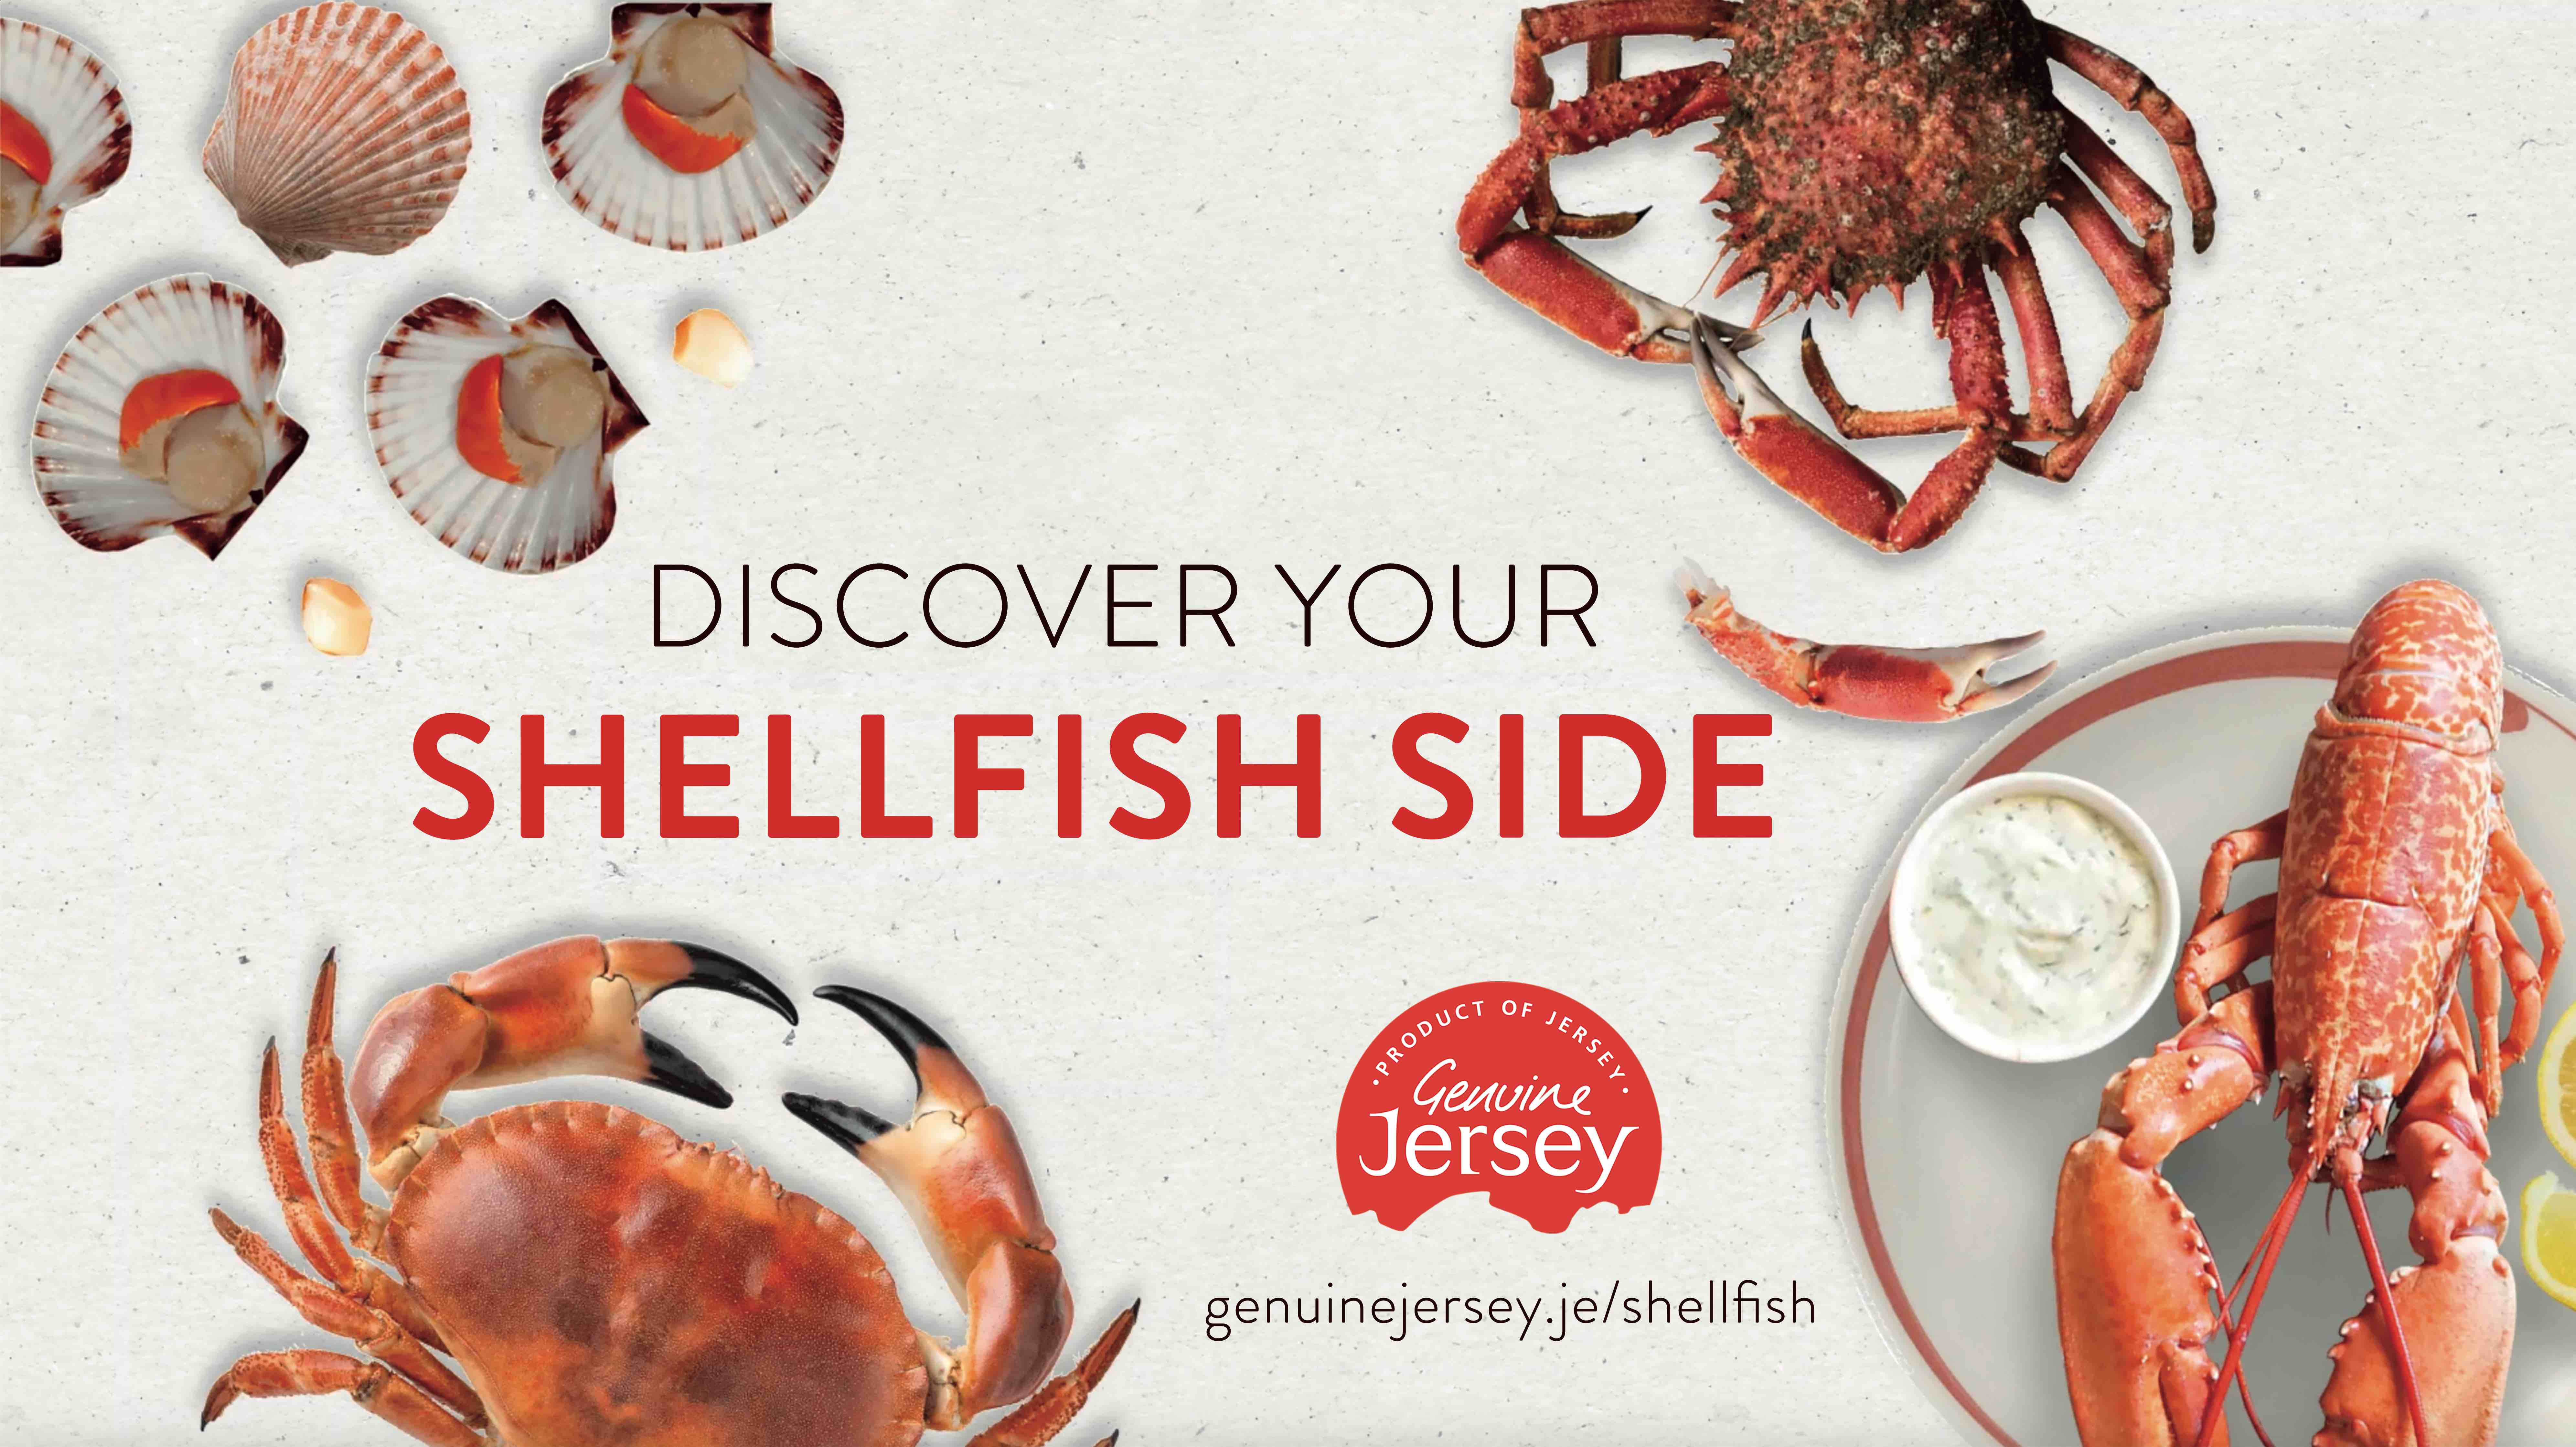 Jersey Shellfish Campaign Launched